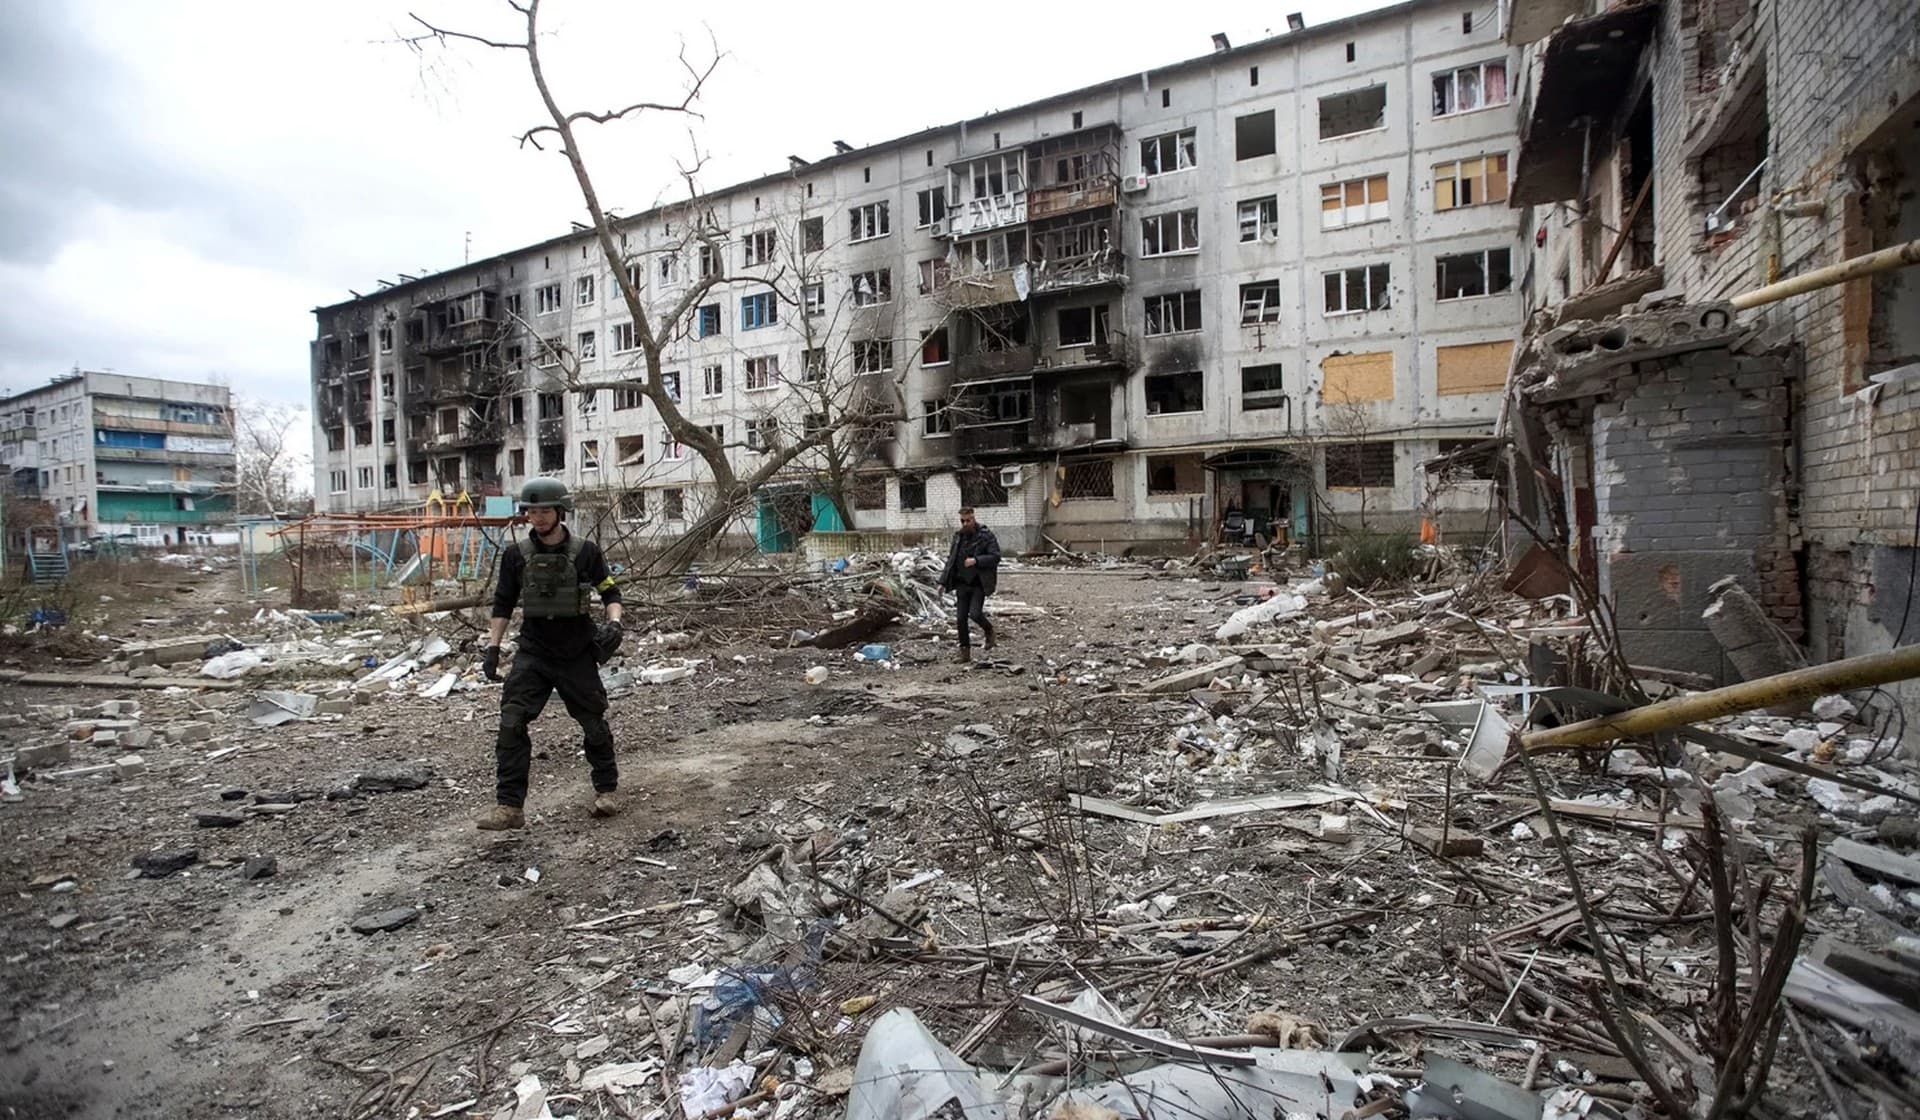 British volunteers Chris and Dave search for local residents to evacuate in a yard of a damaged apartment building in Bakhmut